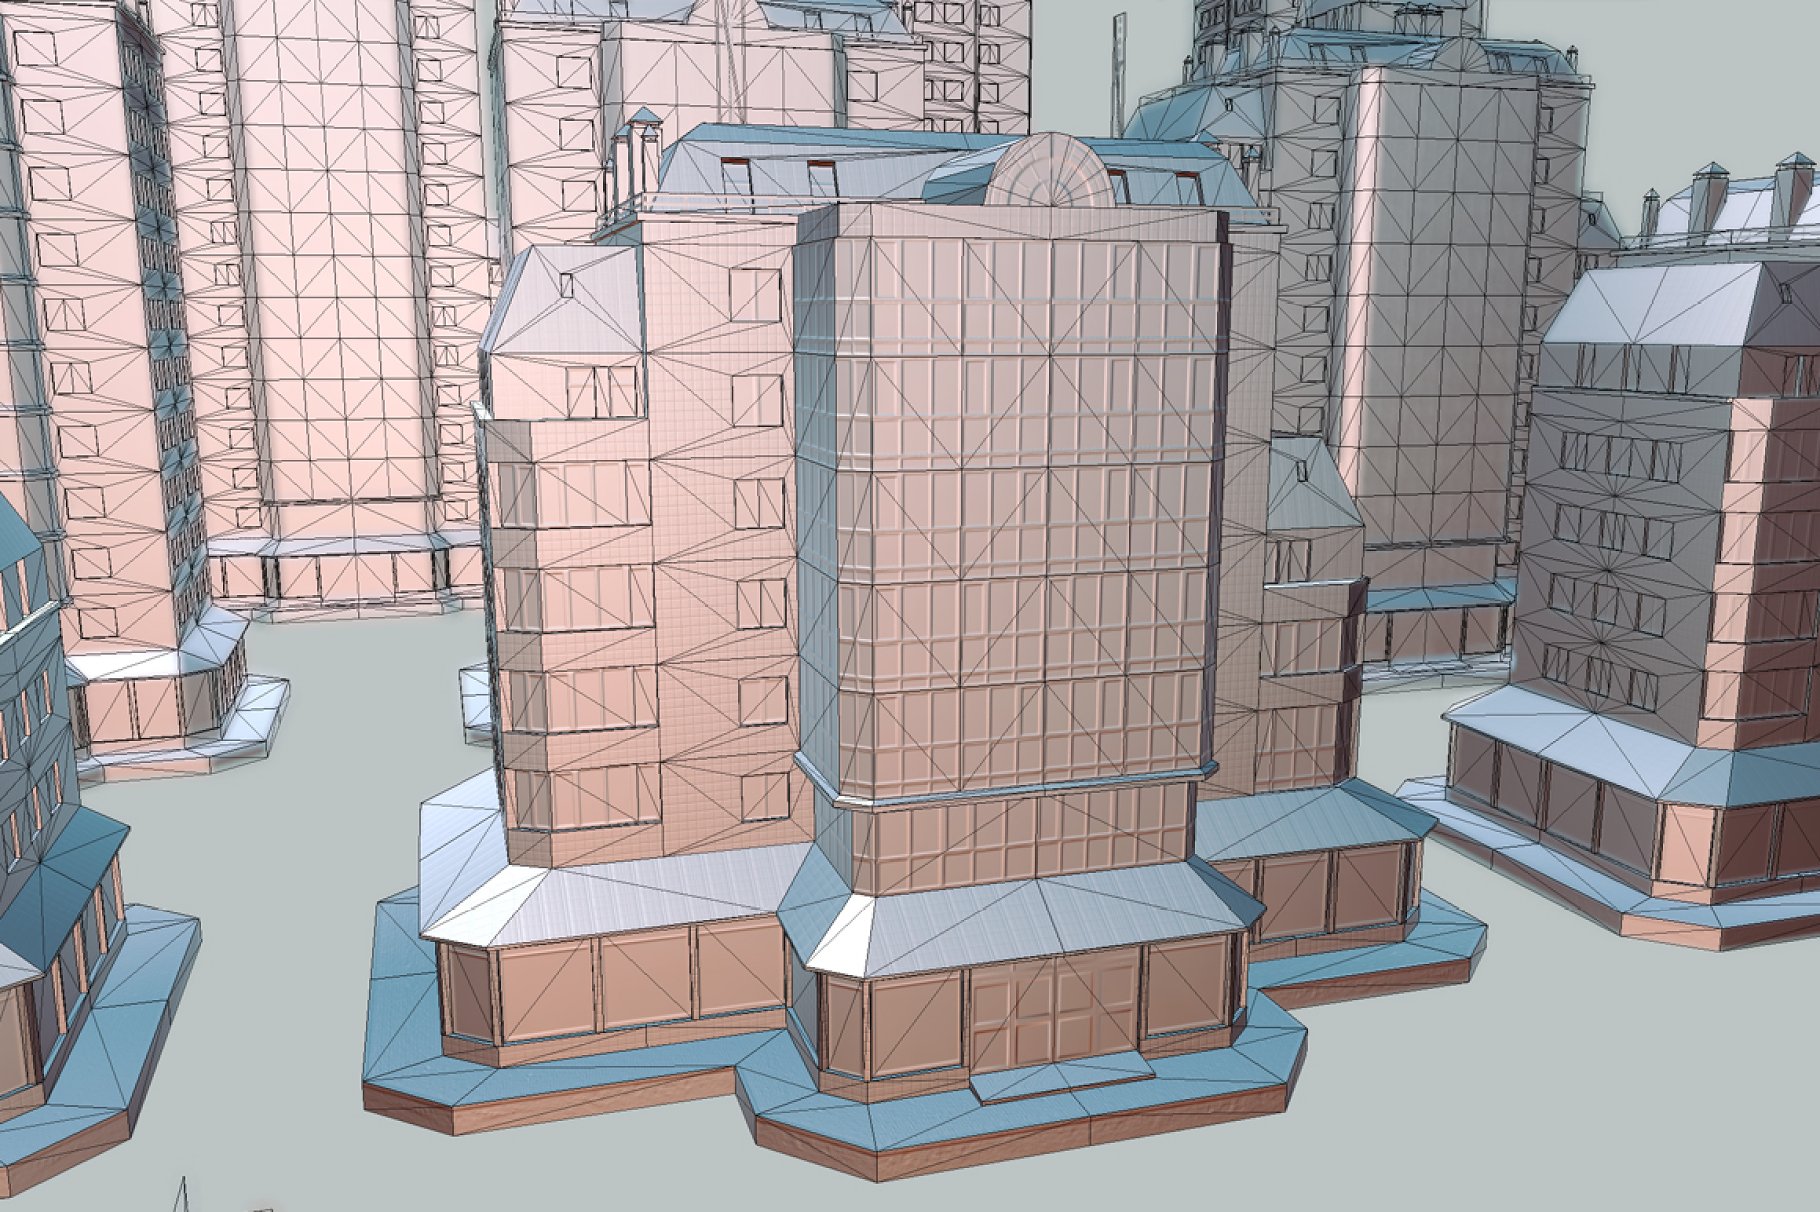 Template image of buildings.